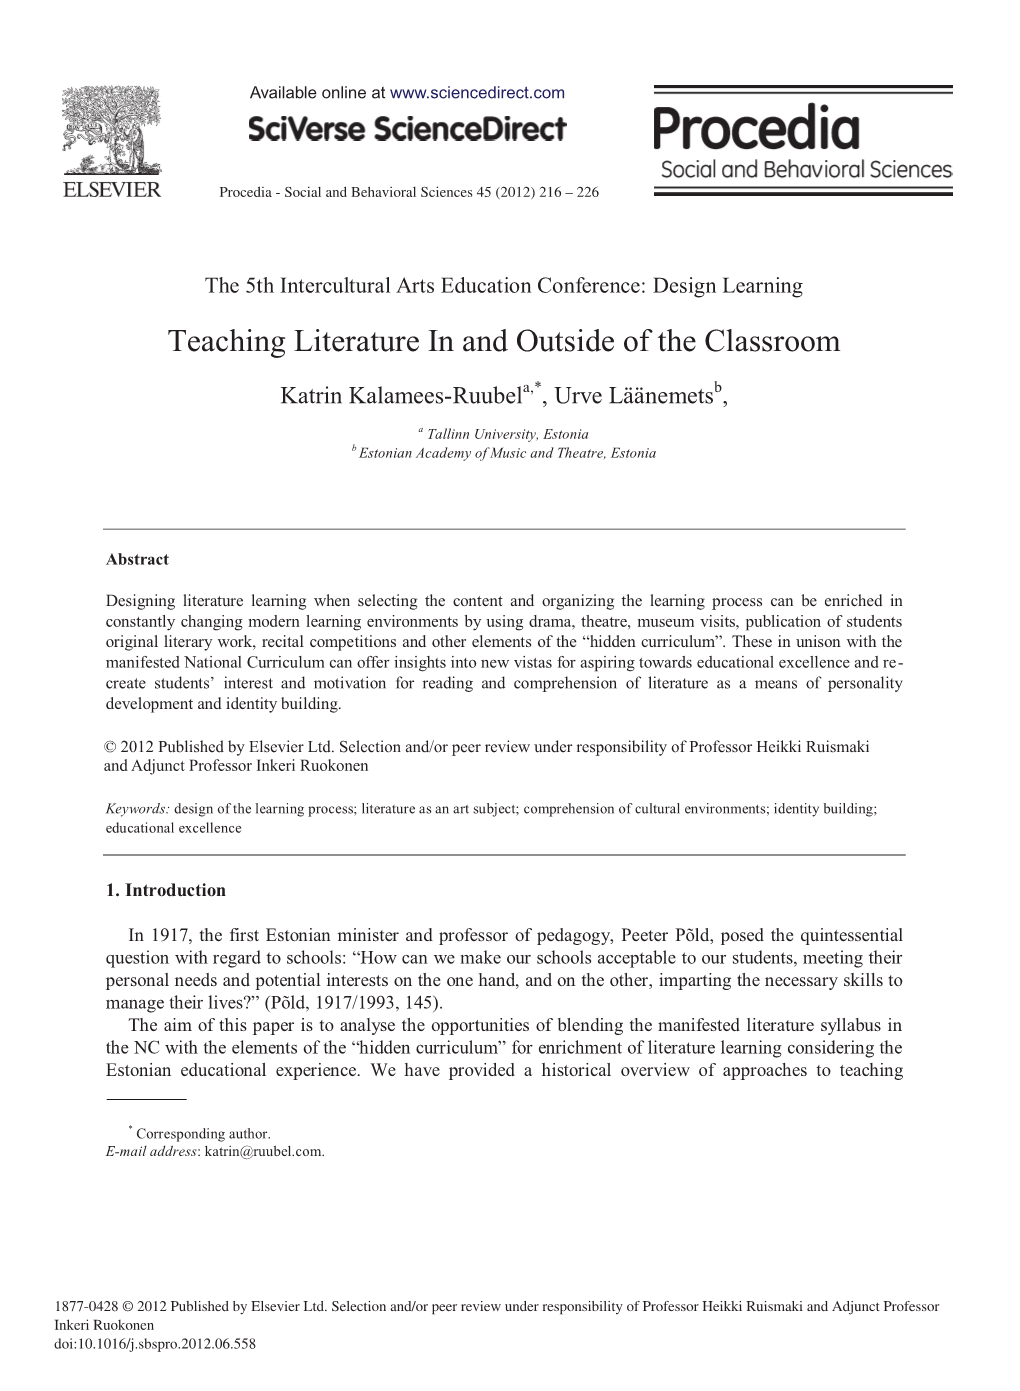 Teaching Literature in and Outside of the Classroom